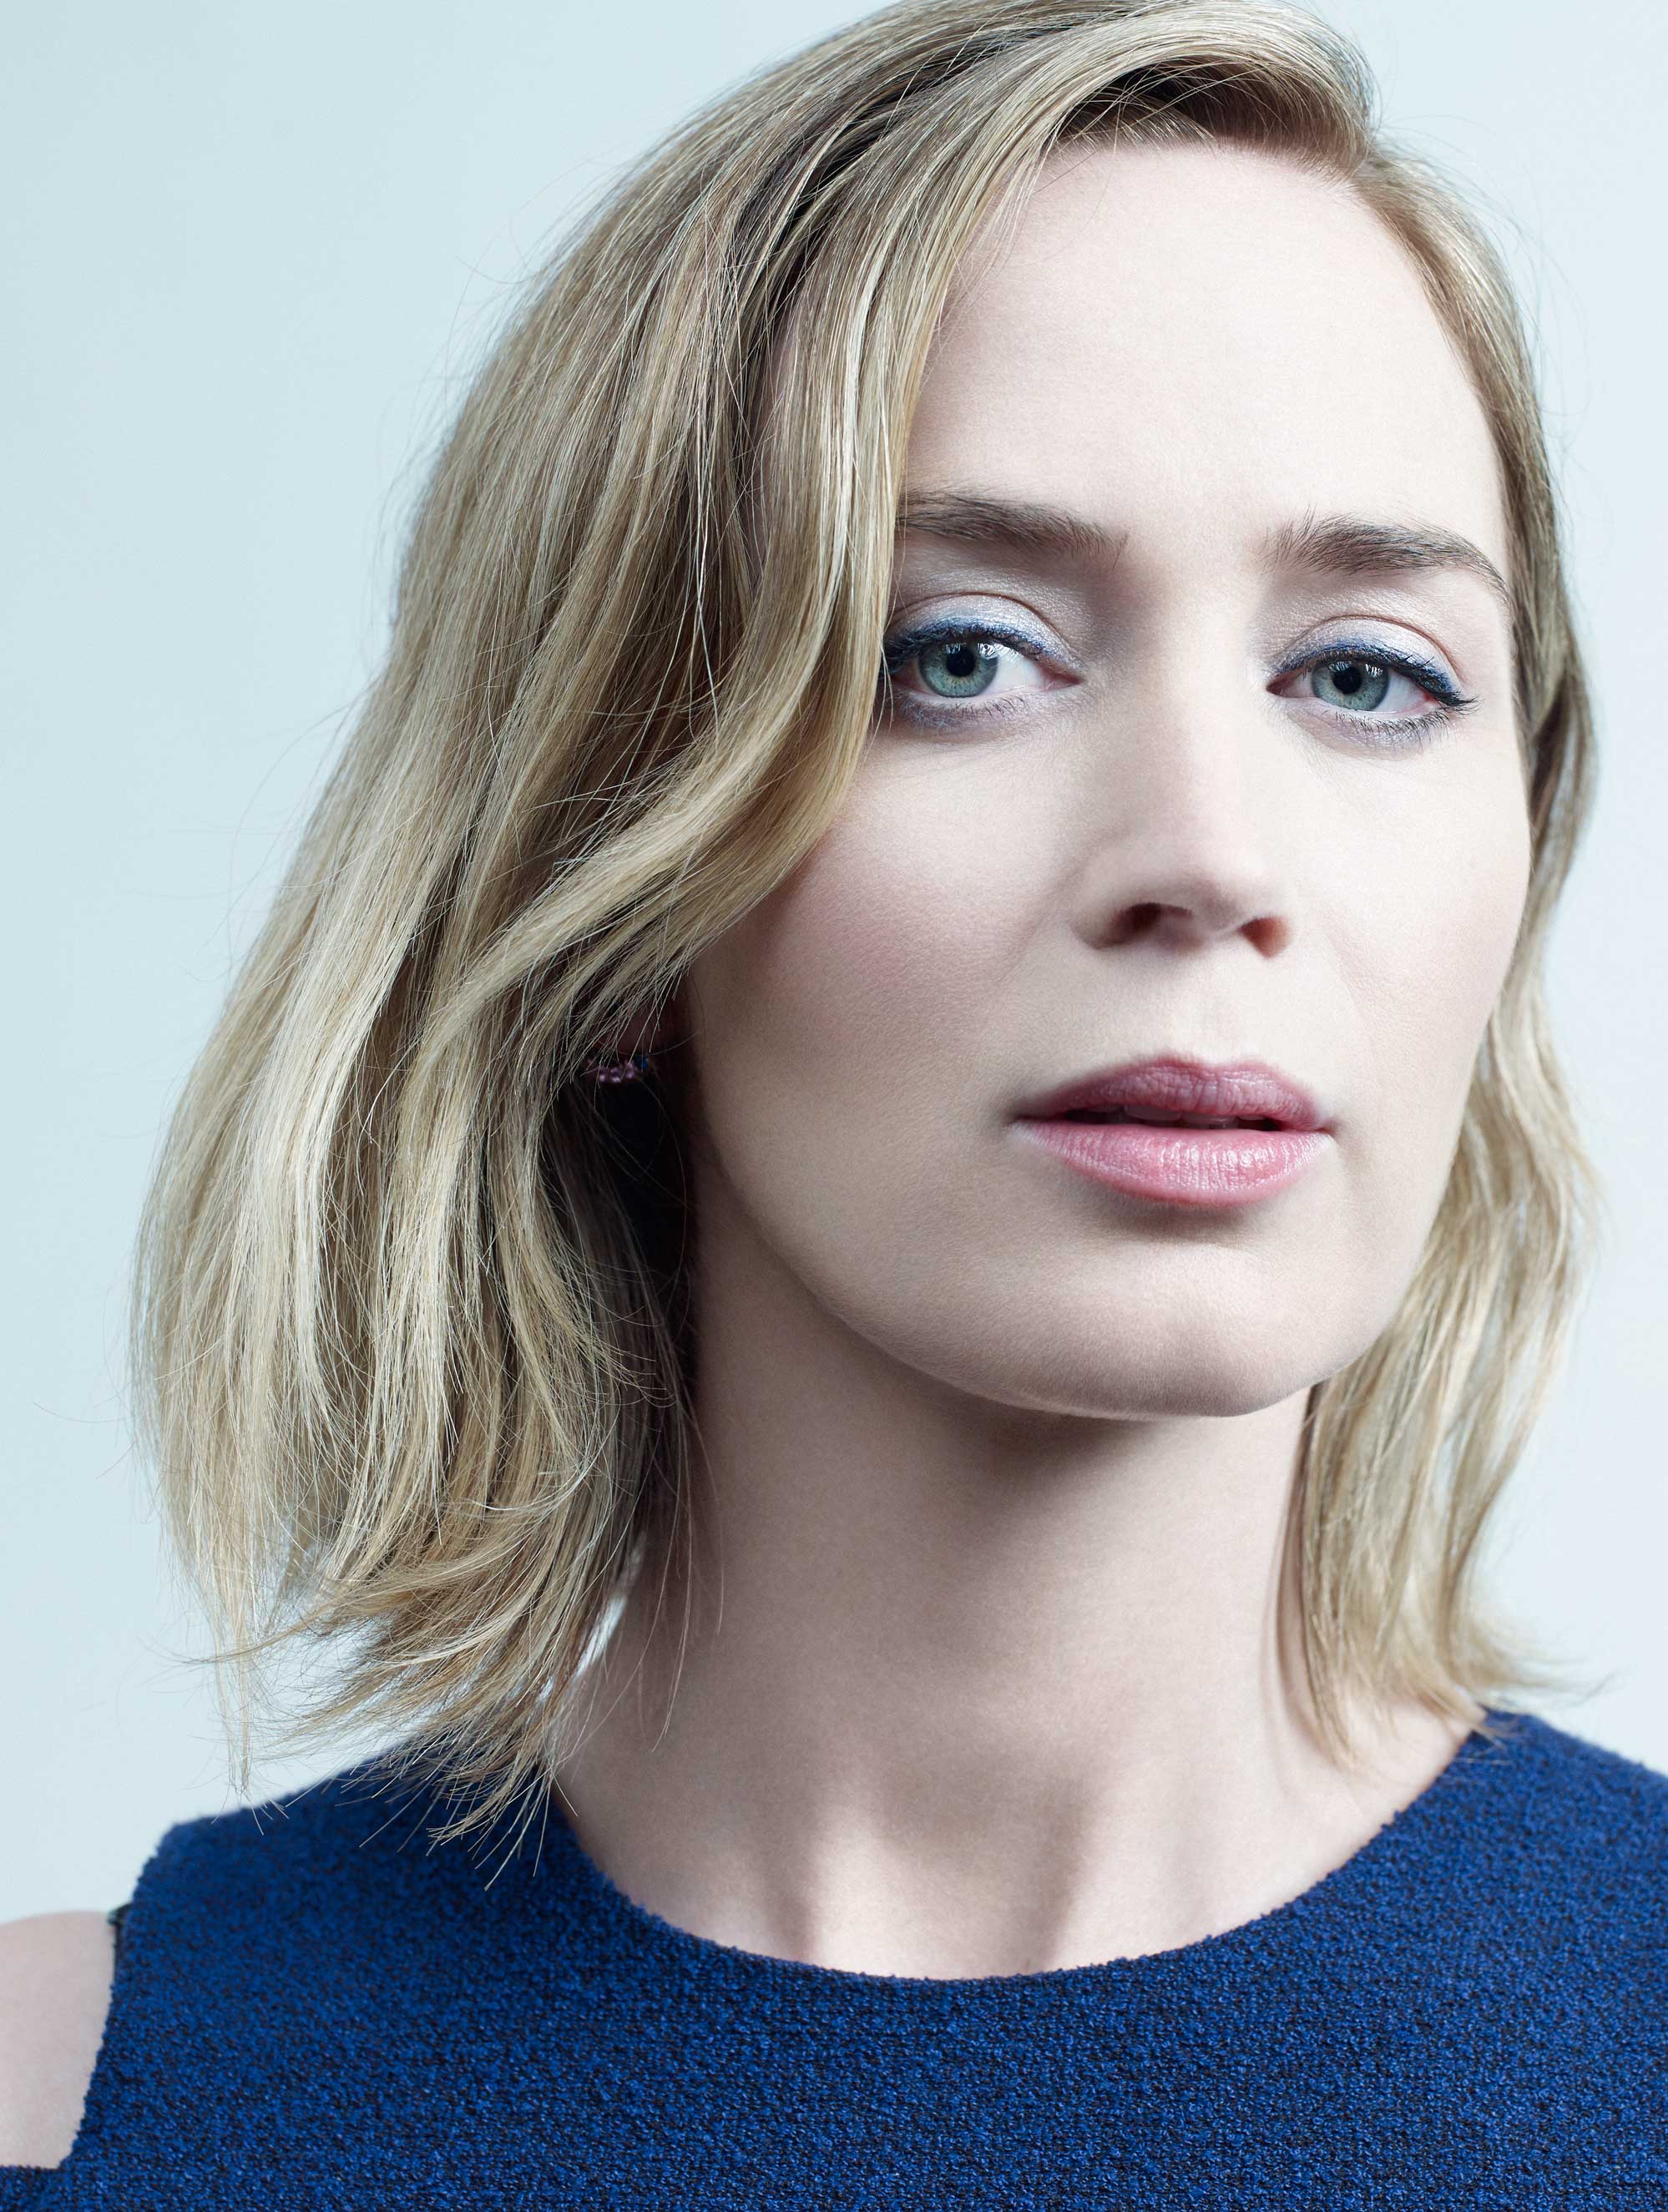 Emily Blunt at The Crosby Street Hotel in New York City, on Aug. 25, 2016. (Peter Hapak for TIME)